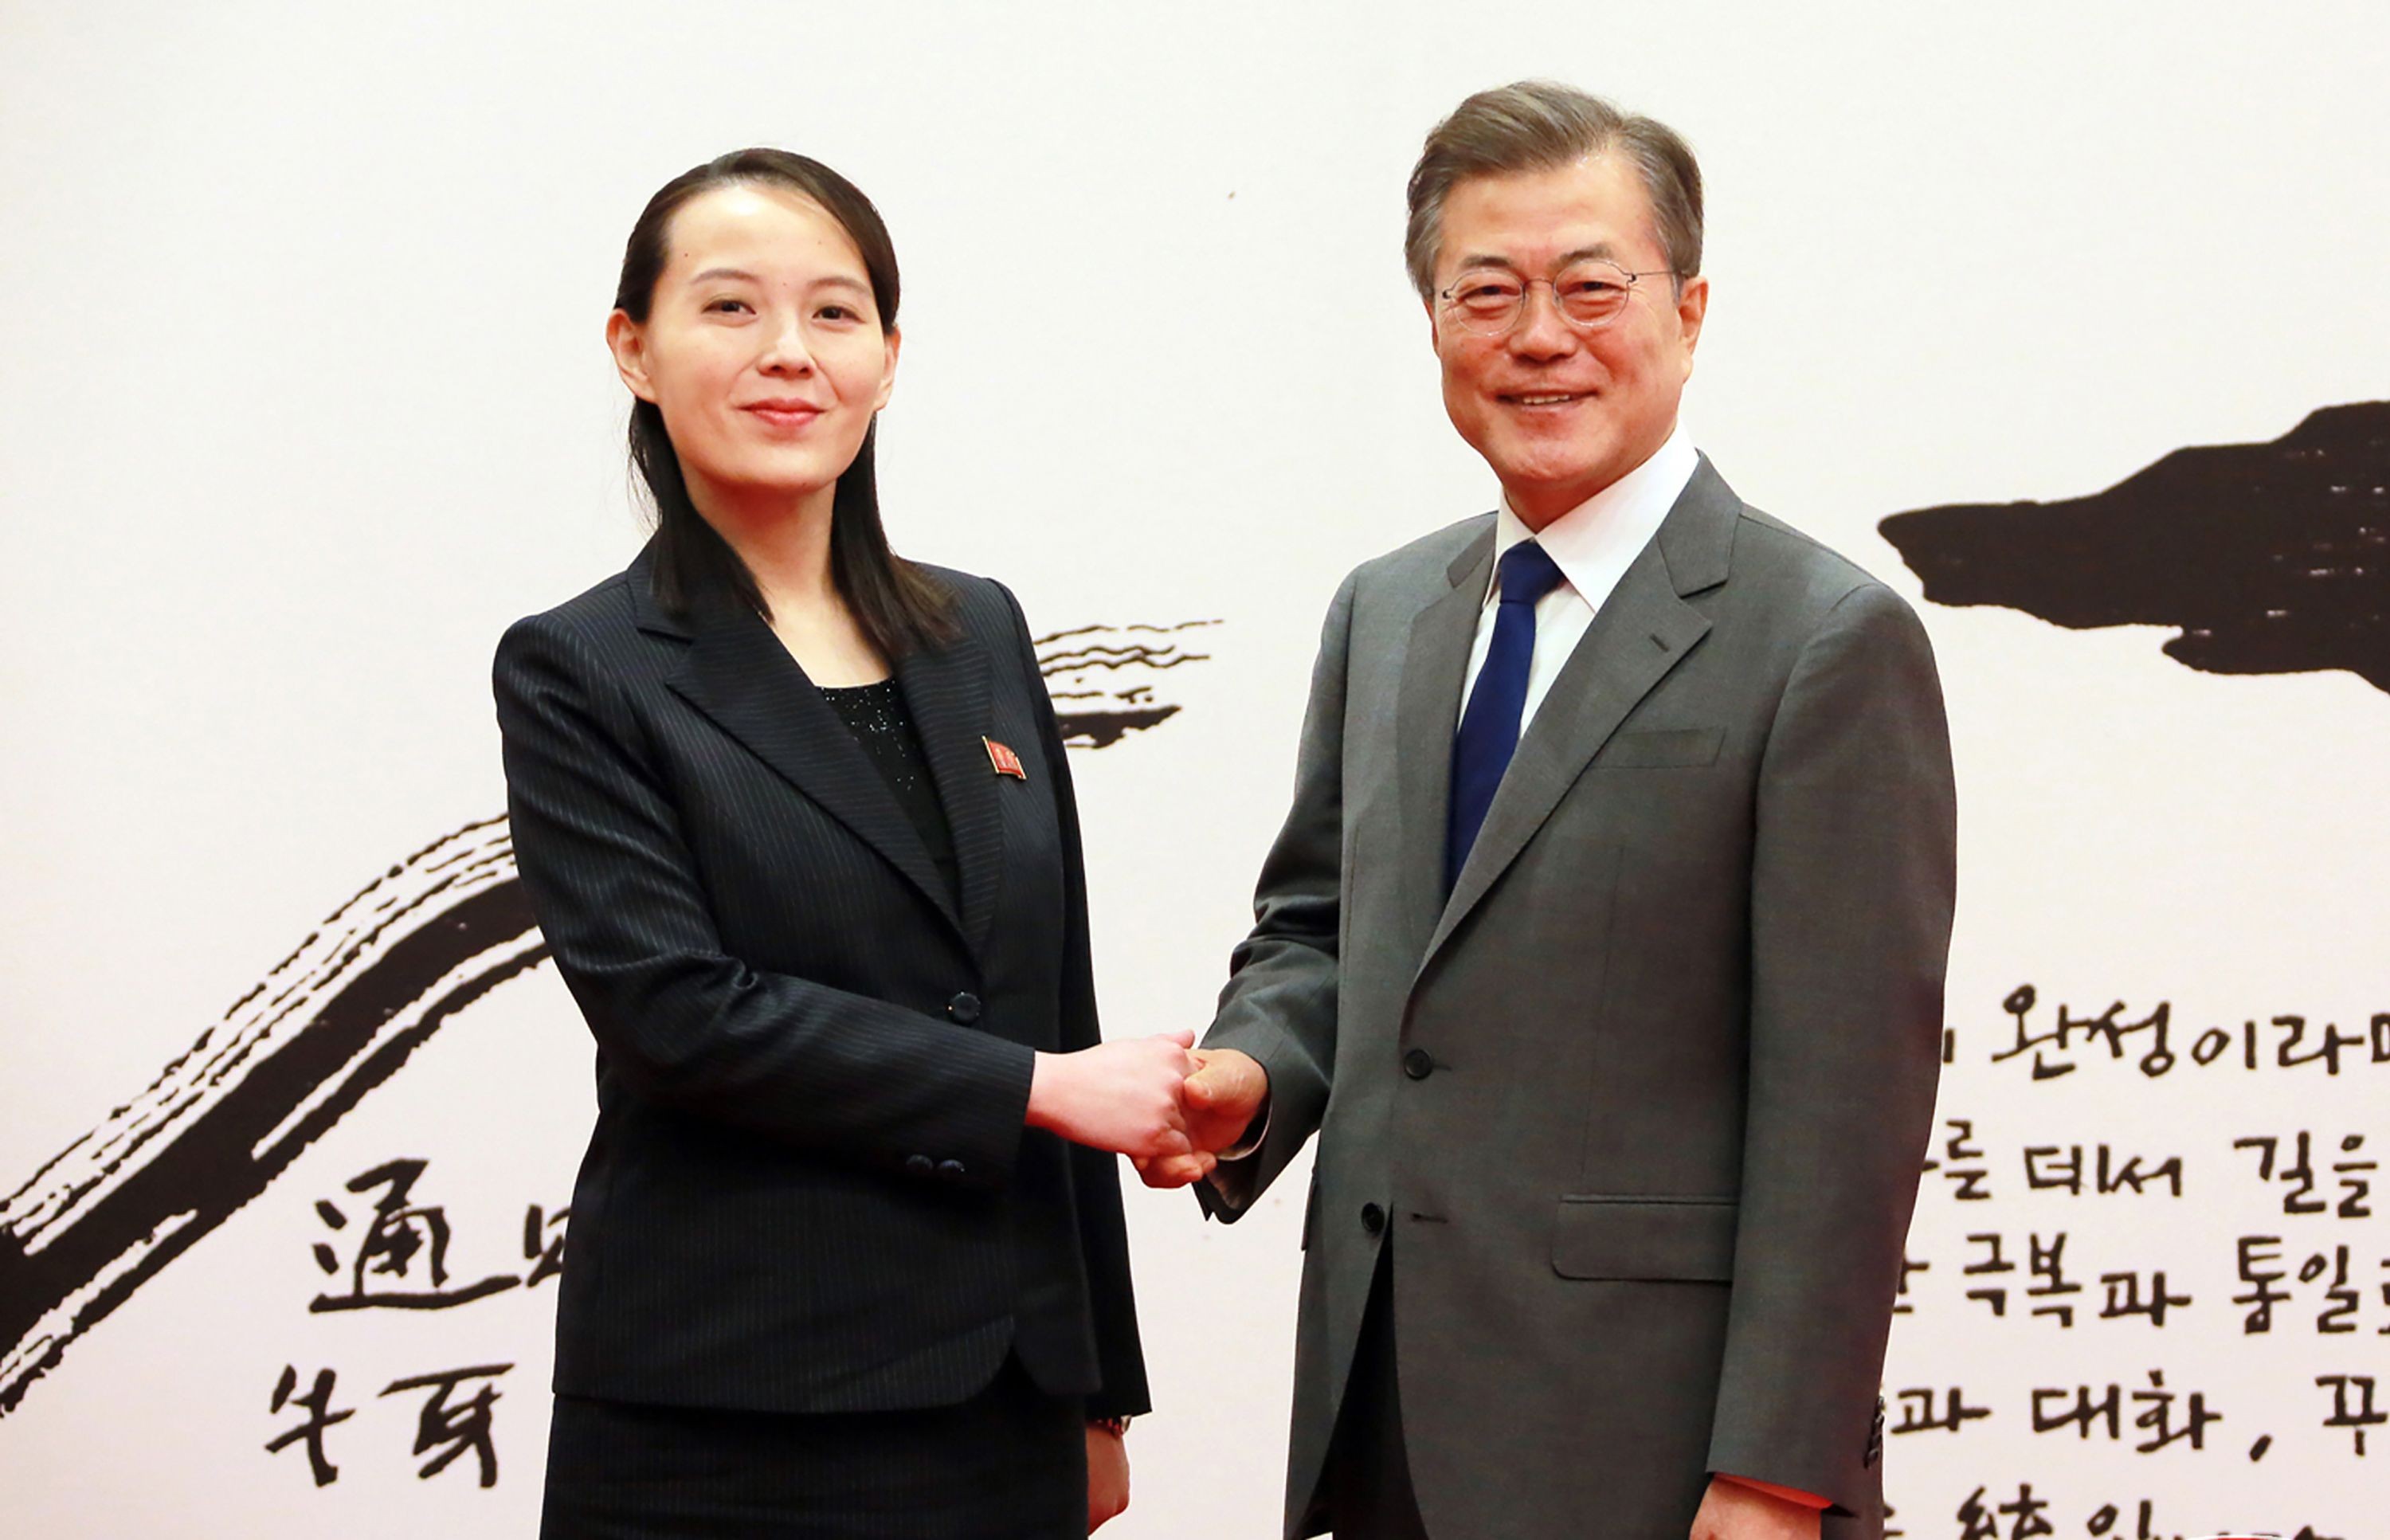 This photo, taken on February 10, 2018 and released February 11 by North Korea's official Korean Central News Agency (KCNA), shows South Korea's President Moon Jae-in posing with North Korean leader Kim Jong-un's sister Kim Yo-jong before their meeting at the presidential Blue House in Seoul. File photo: KCNA via KNS/AFP